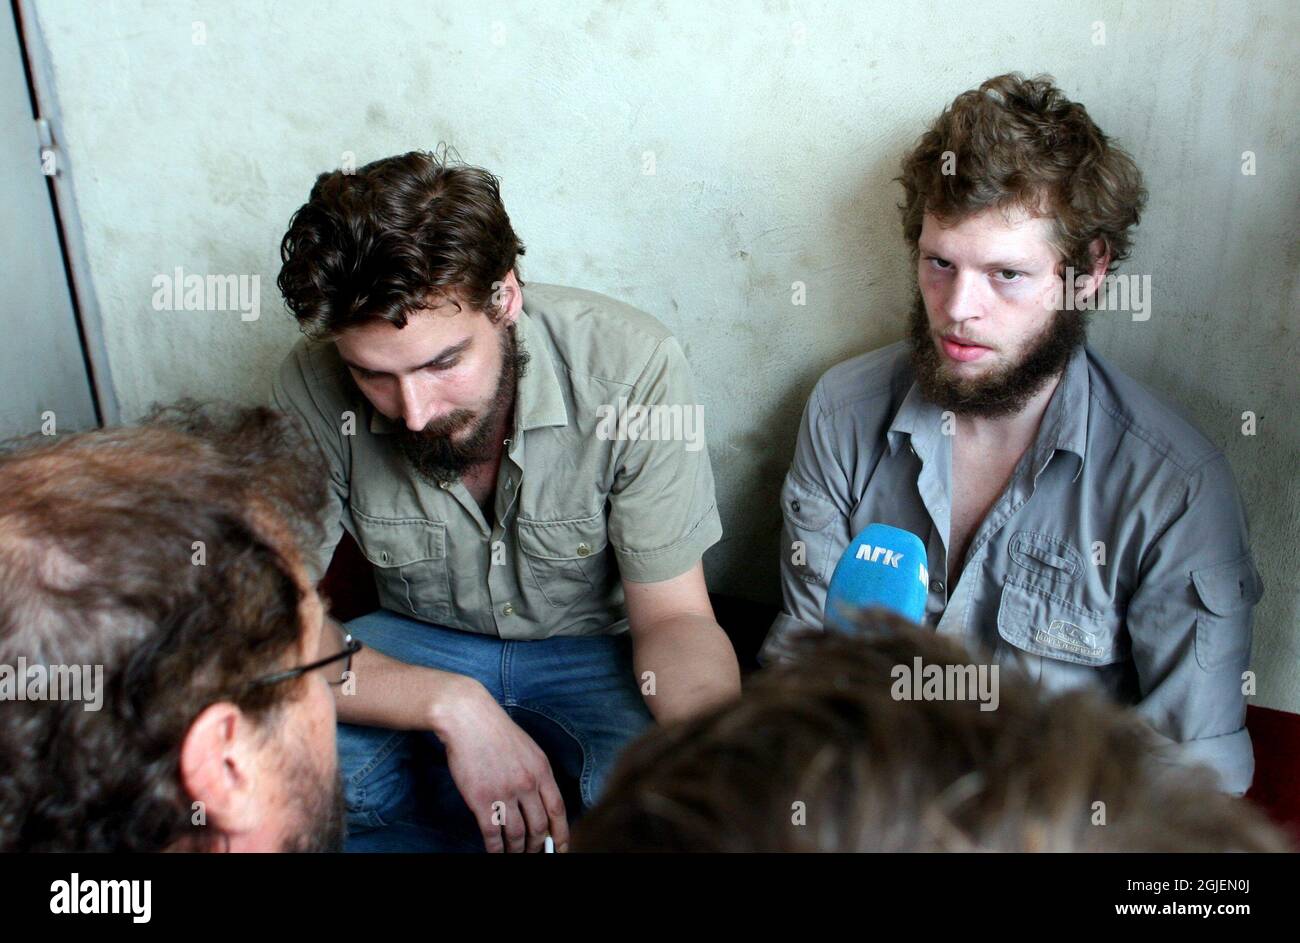 Norwegian Tjostolv Moland and Joshua French who are on trial for murder in Kisangani, Congo have been sentenced to death. Stock Photo